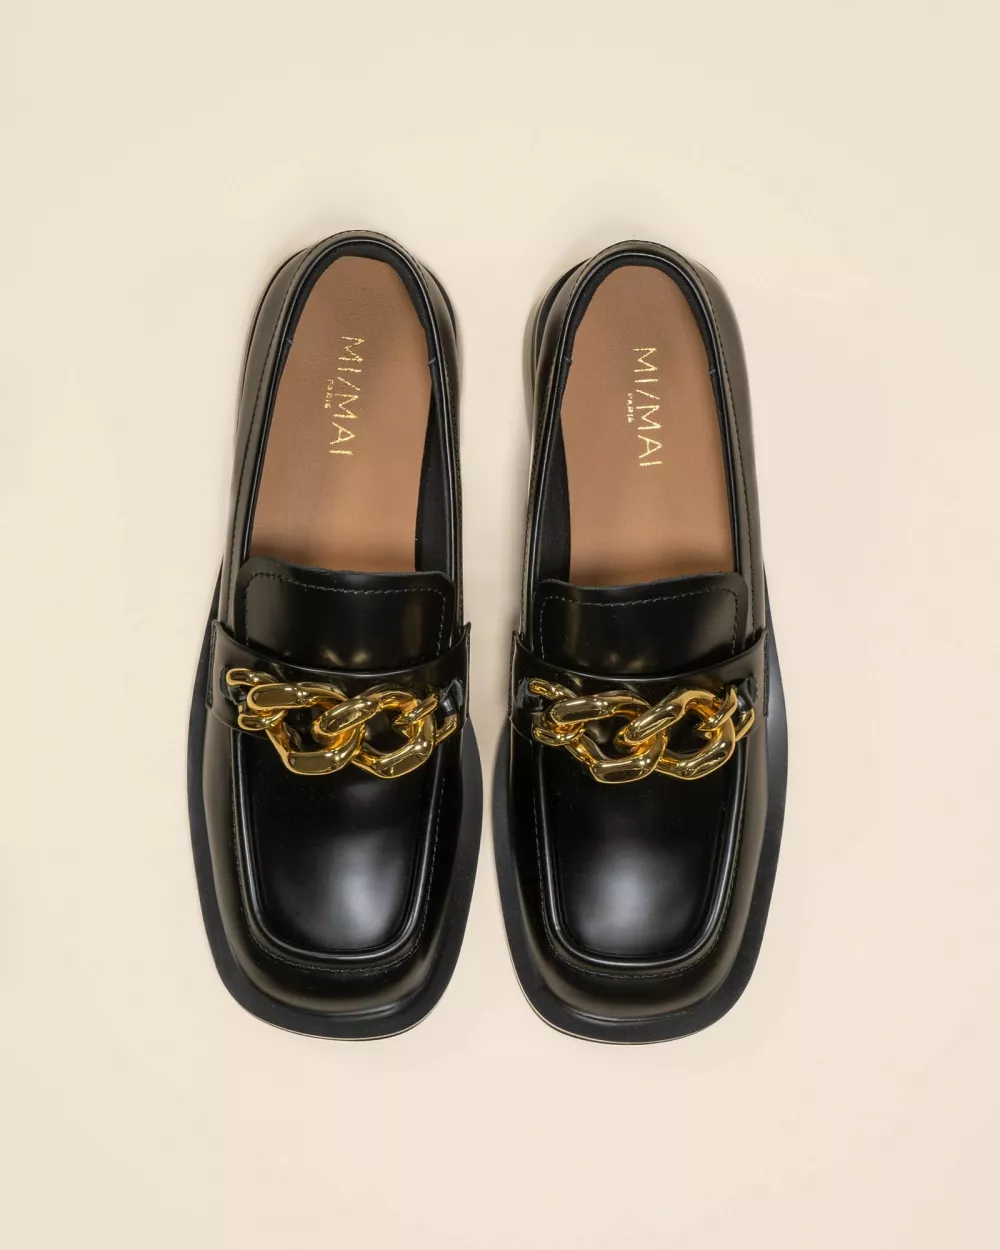 Darlow Gold loafers